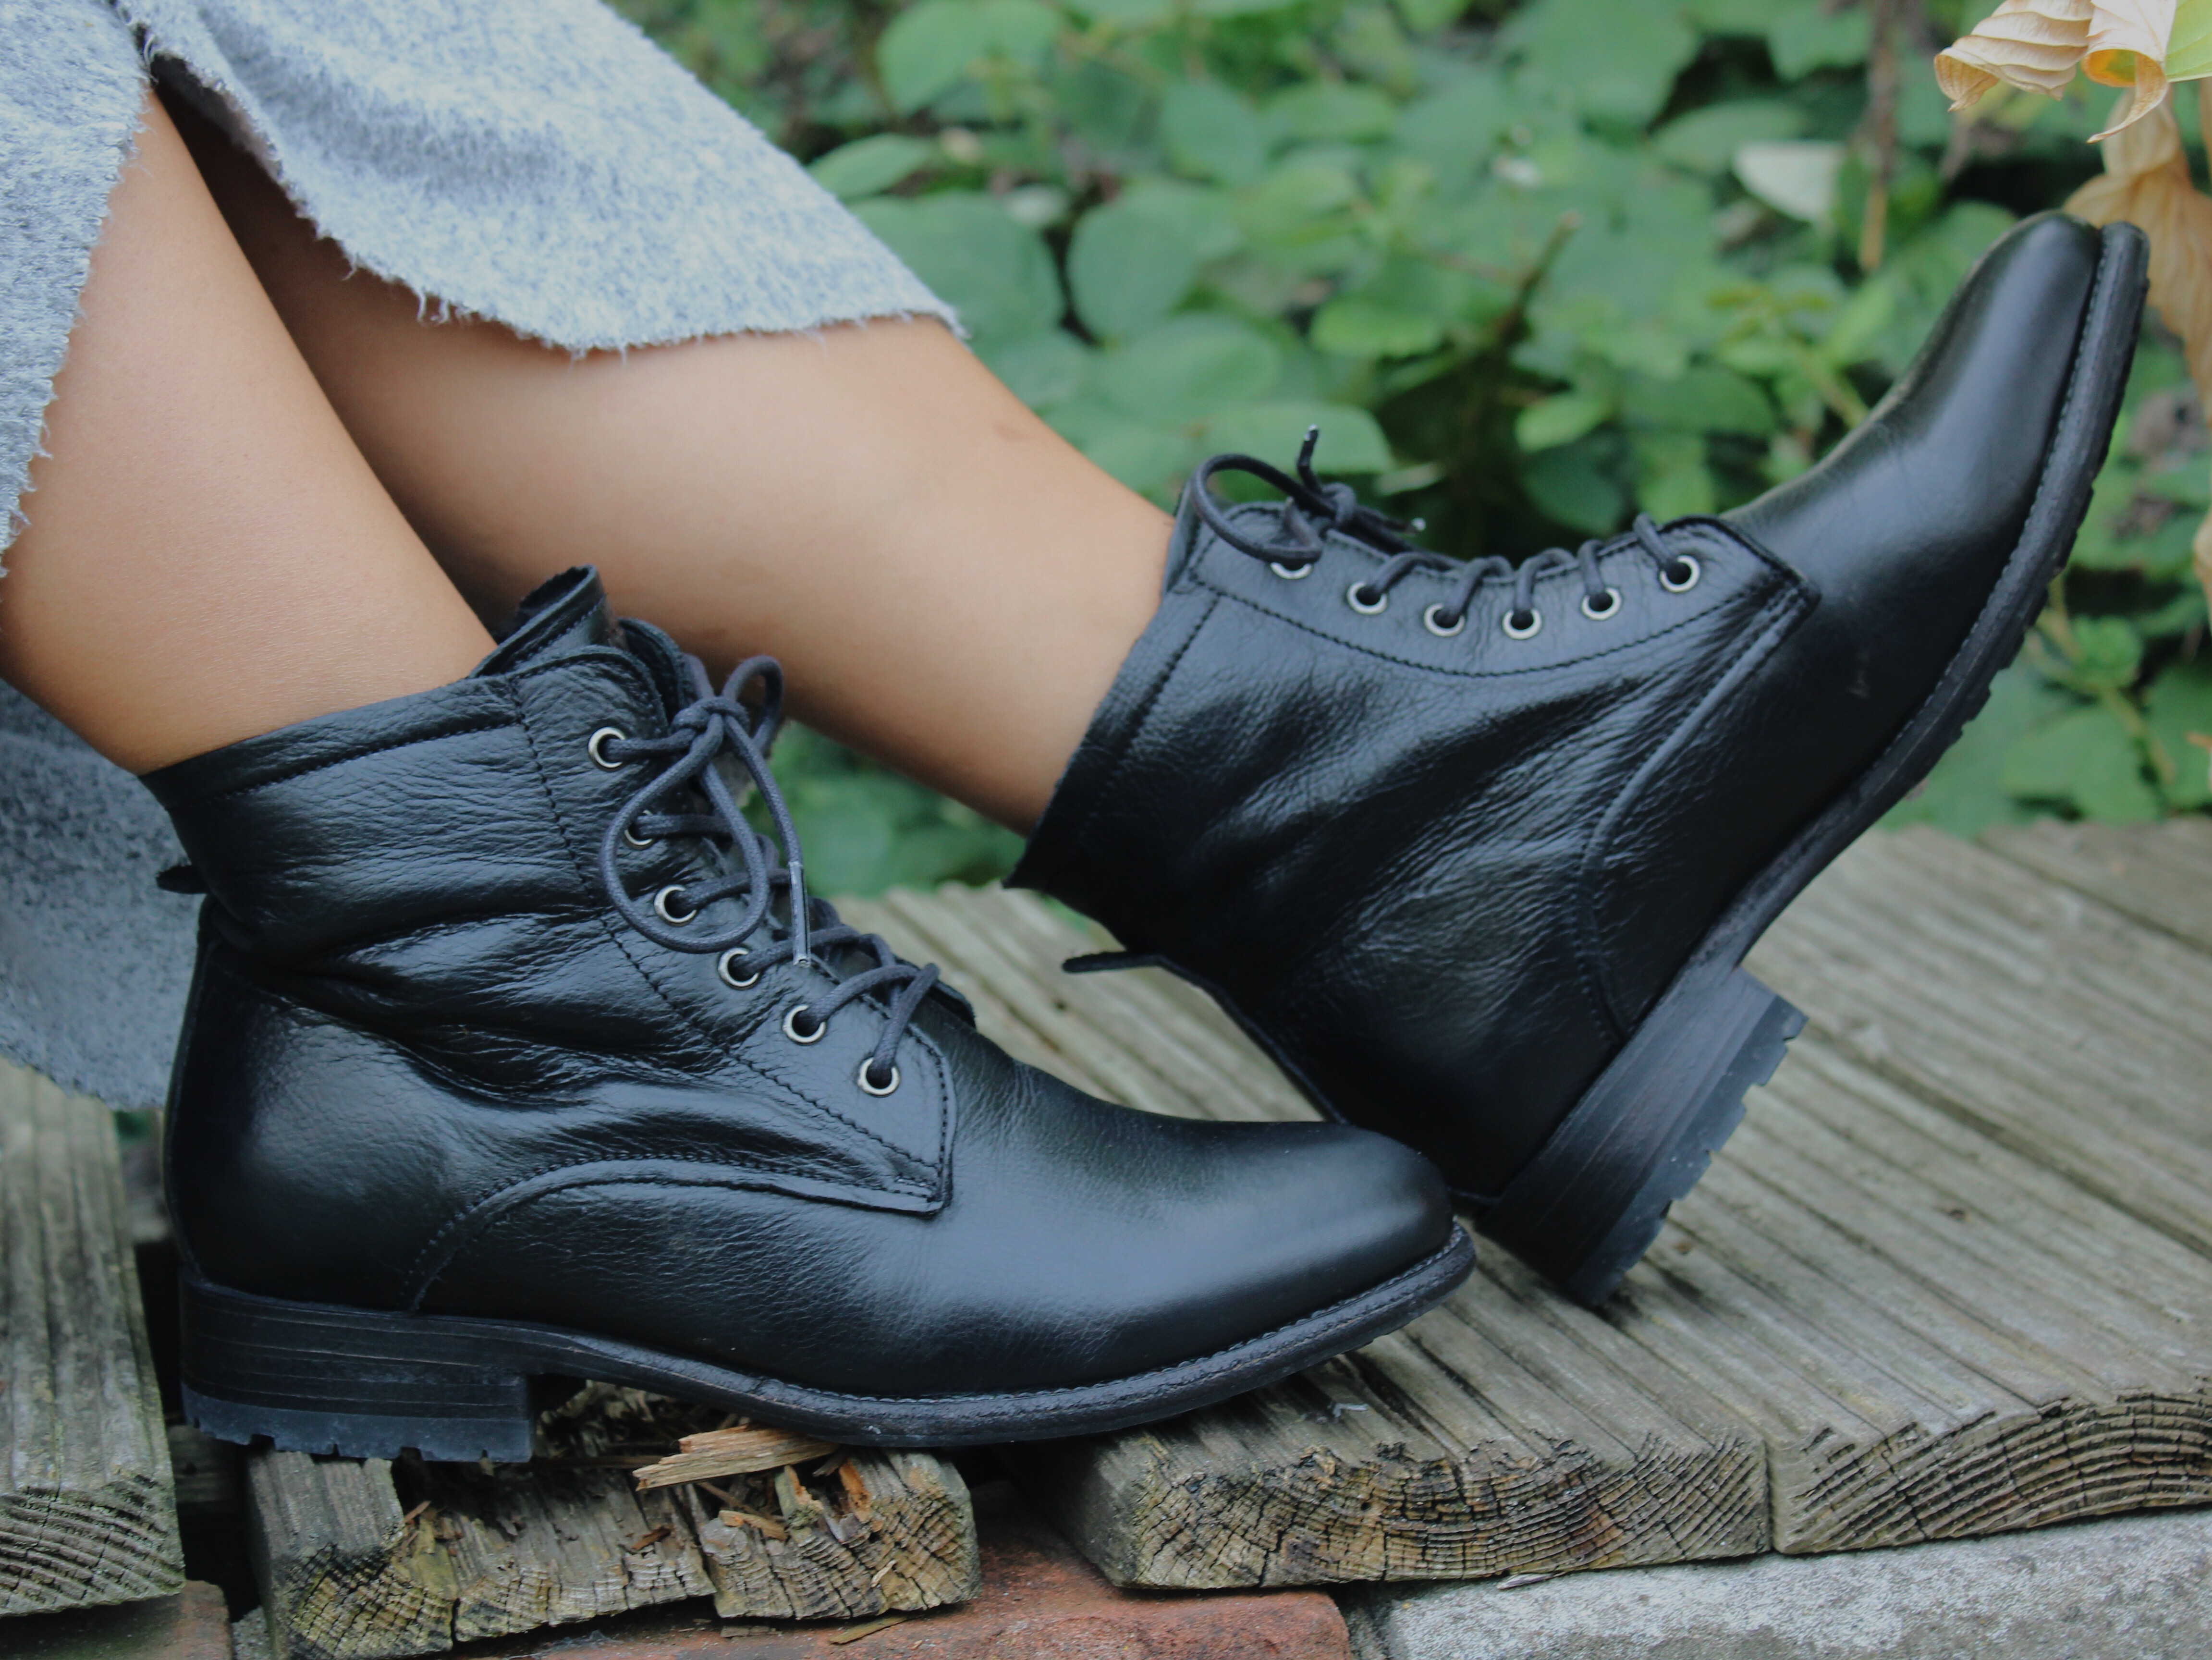 the comfi Blackstone boots you need this winter - Celmatique